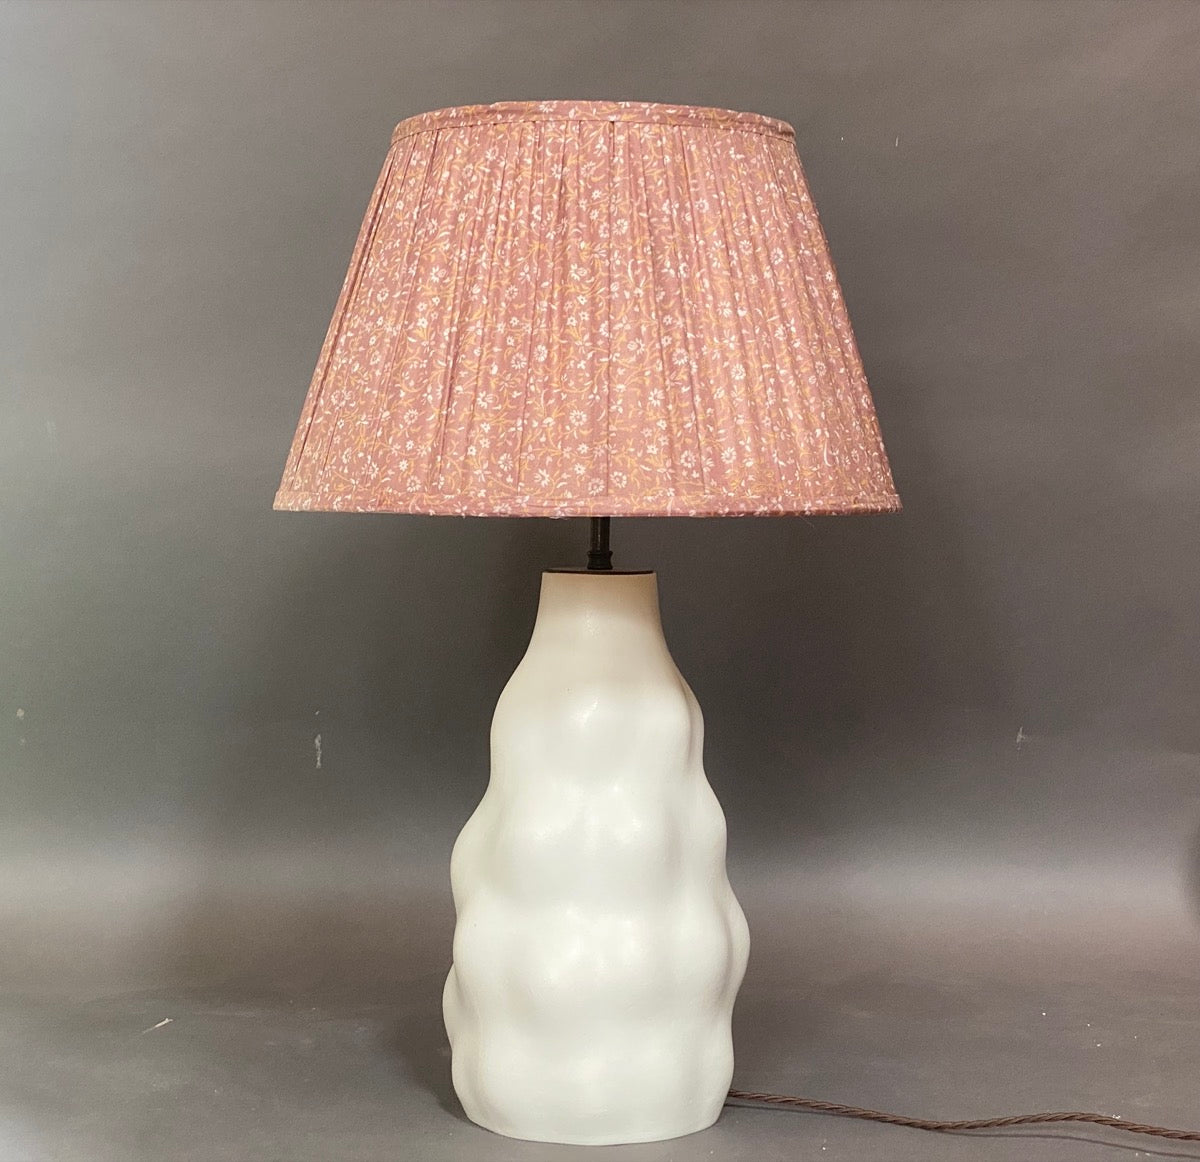 Dusty pink paisley lampshade on lamp